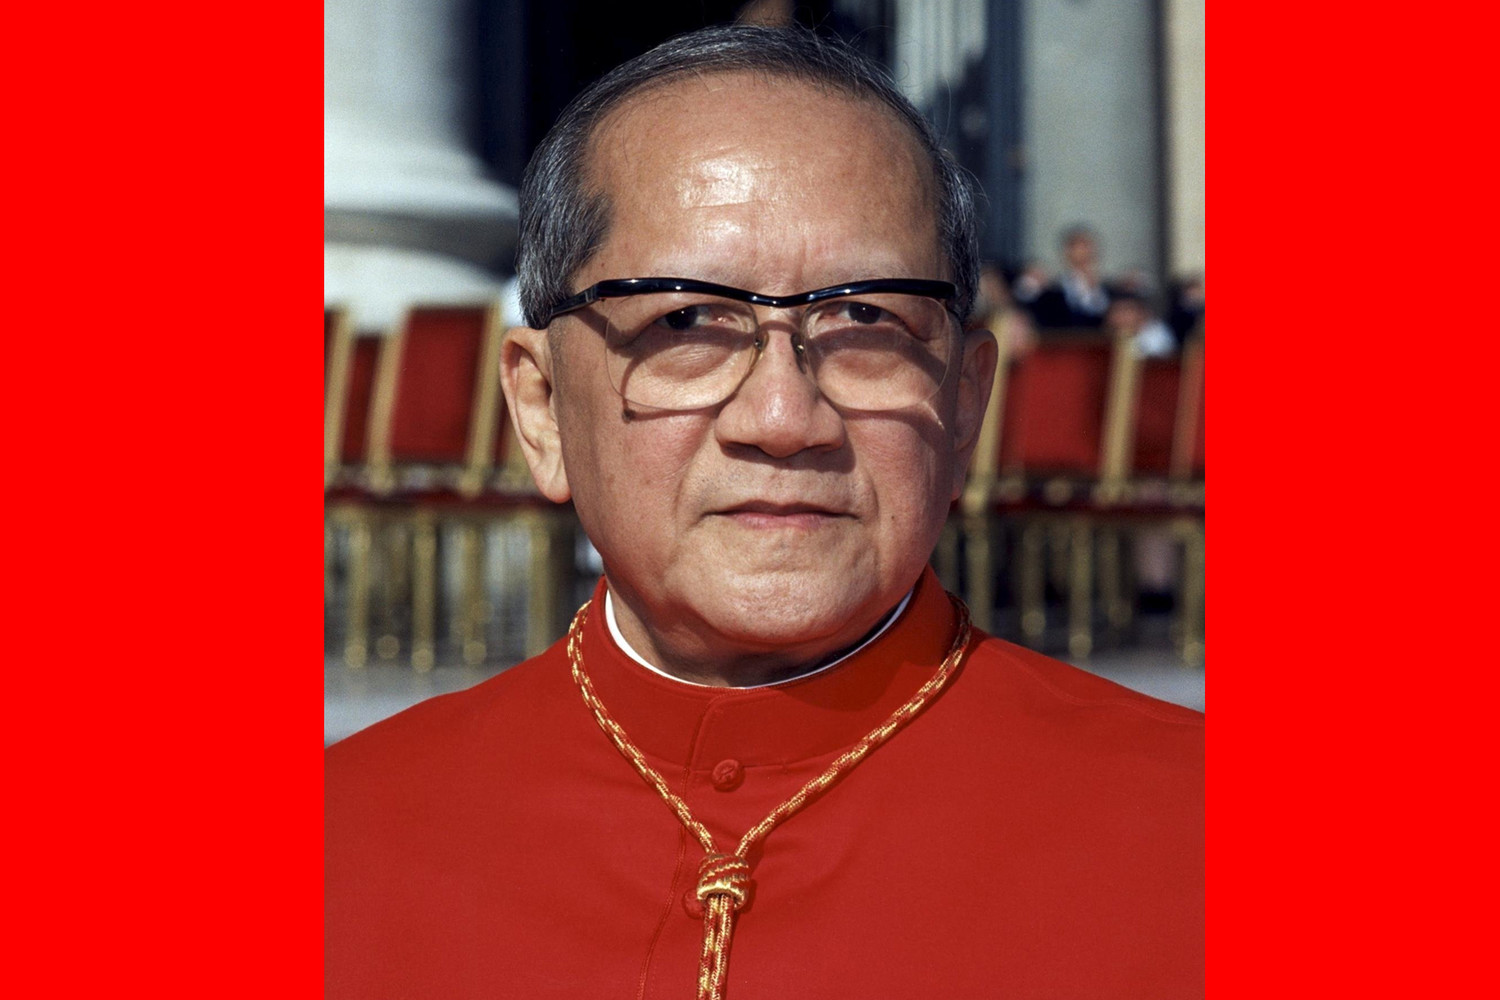 Vietnamese Cardinal Francois Nguyen Van Thuan is pictured at the Vatican in this 2001 file photo. Pope Francis cited the late cardinal in "Gaudete et Exsultate" ("Rejoice and Be Glad"), the apostolic exhortation on holiness published April 9.